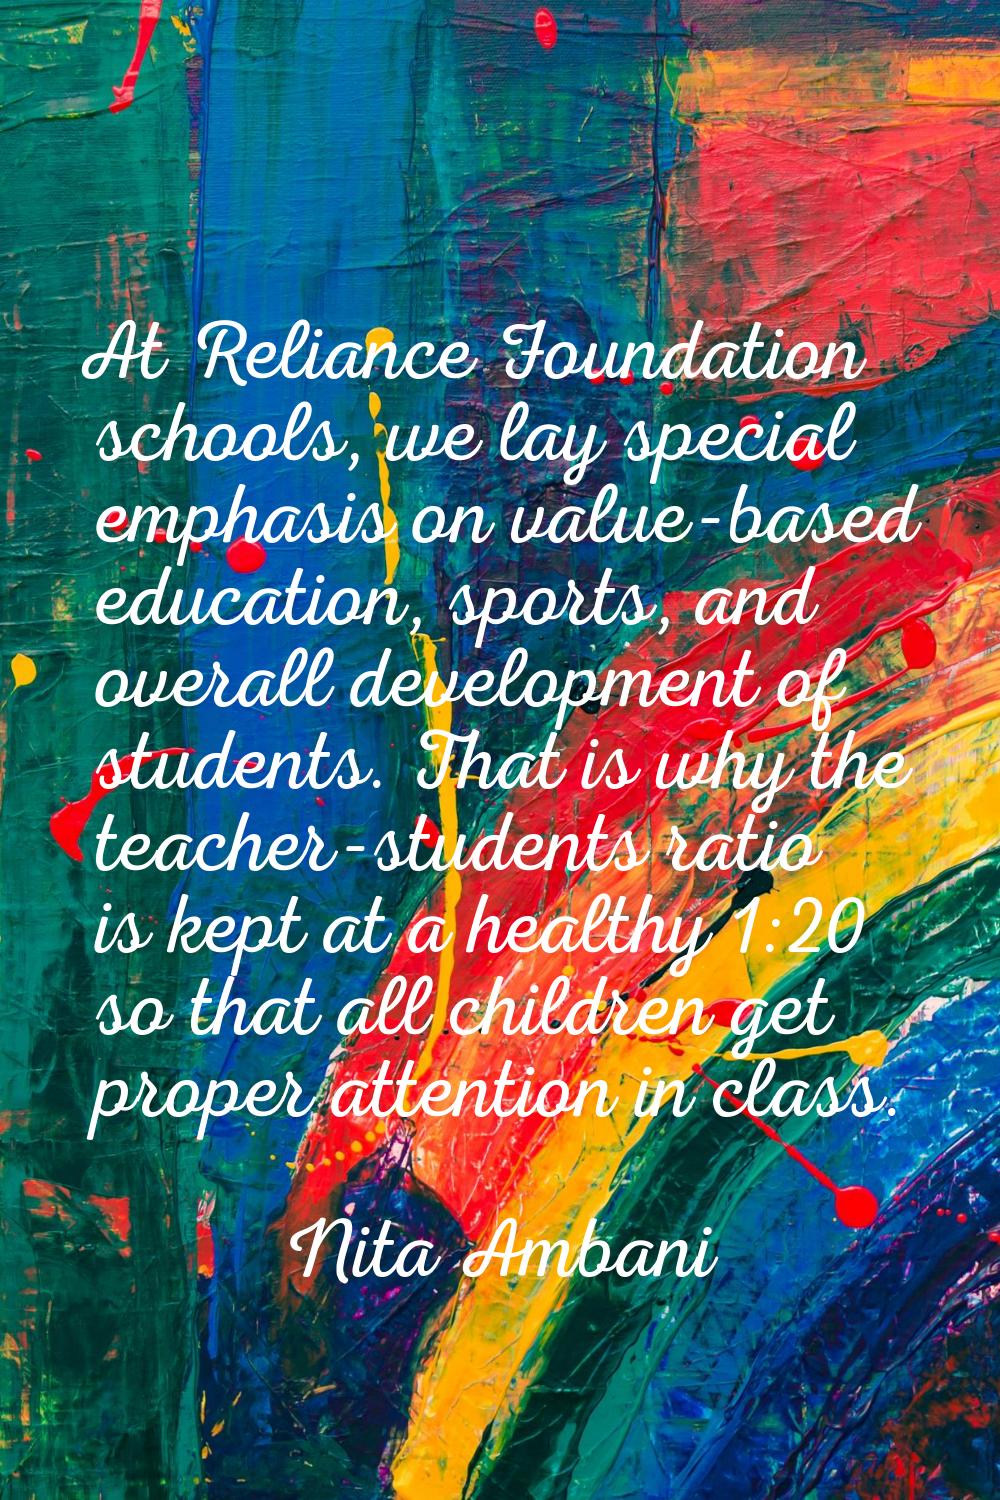 At Reliance Foundation schools, we lay special emphasis on value-based education, sports, and overa